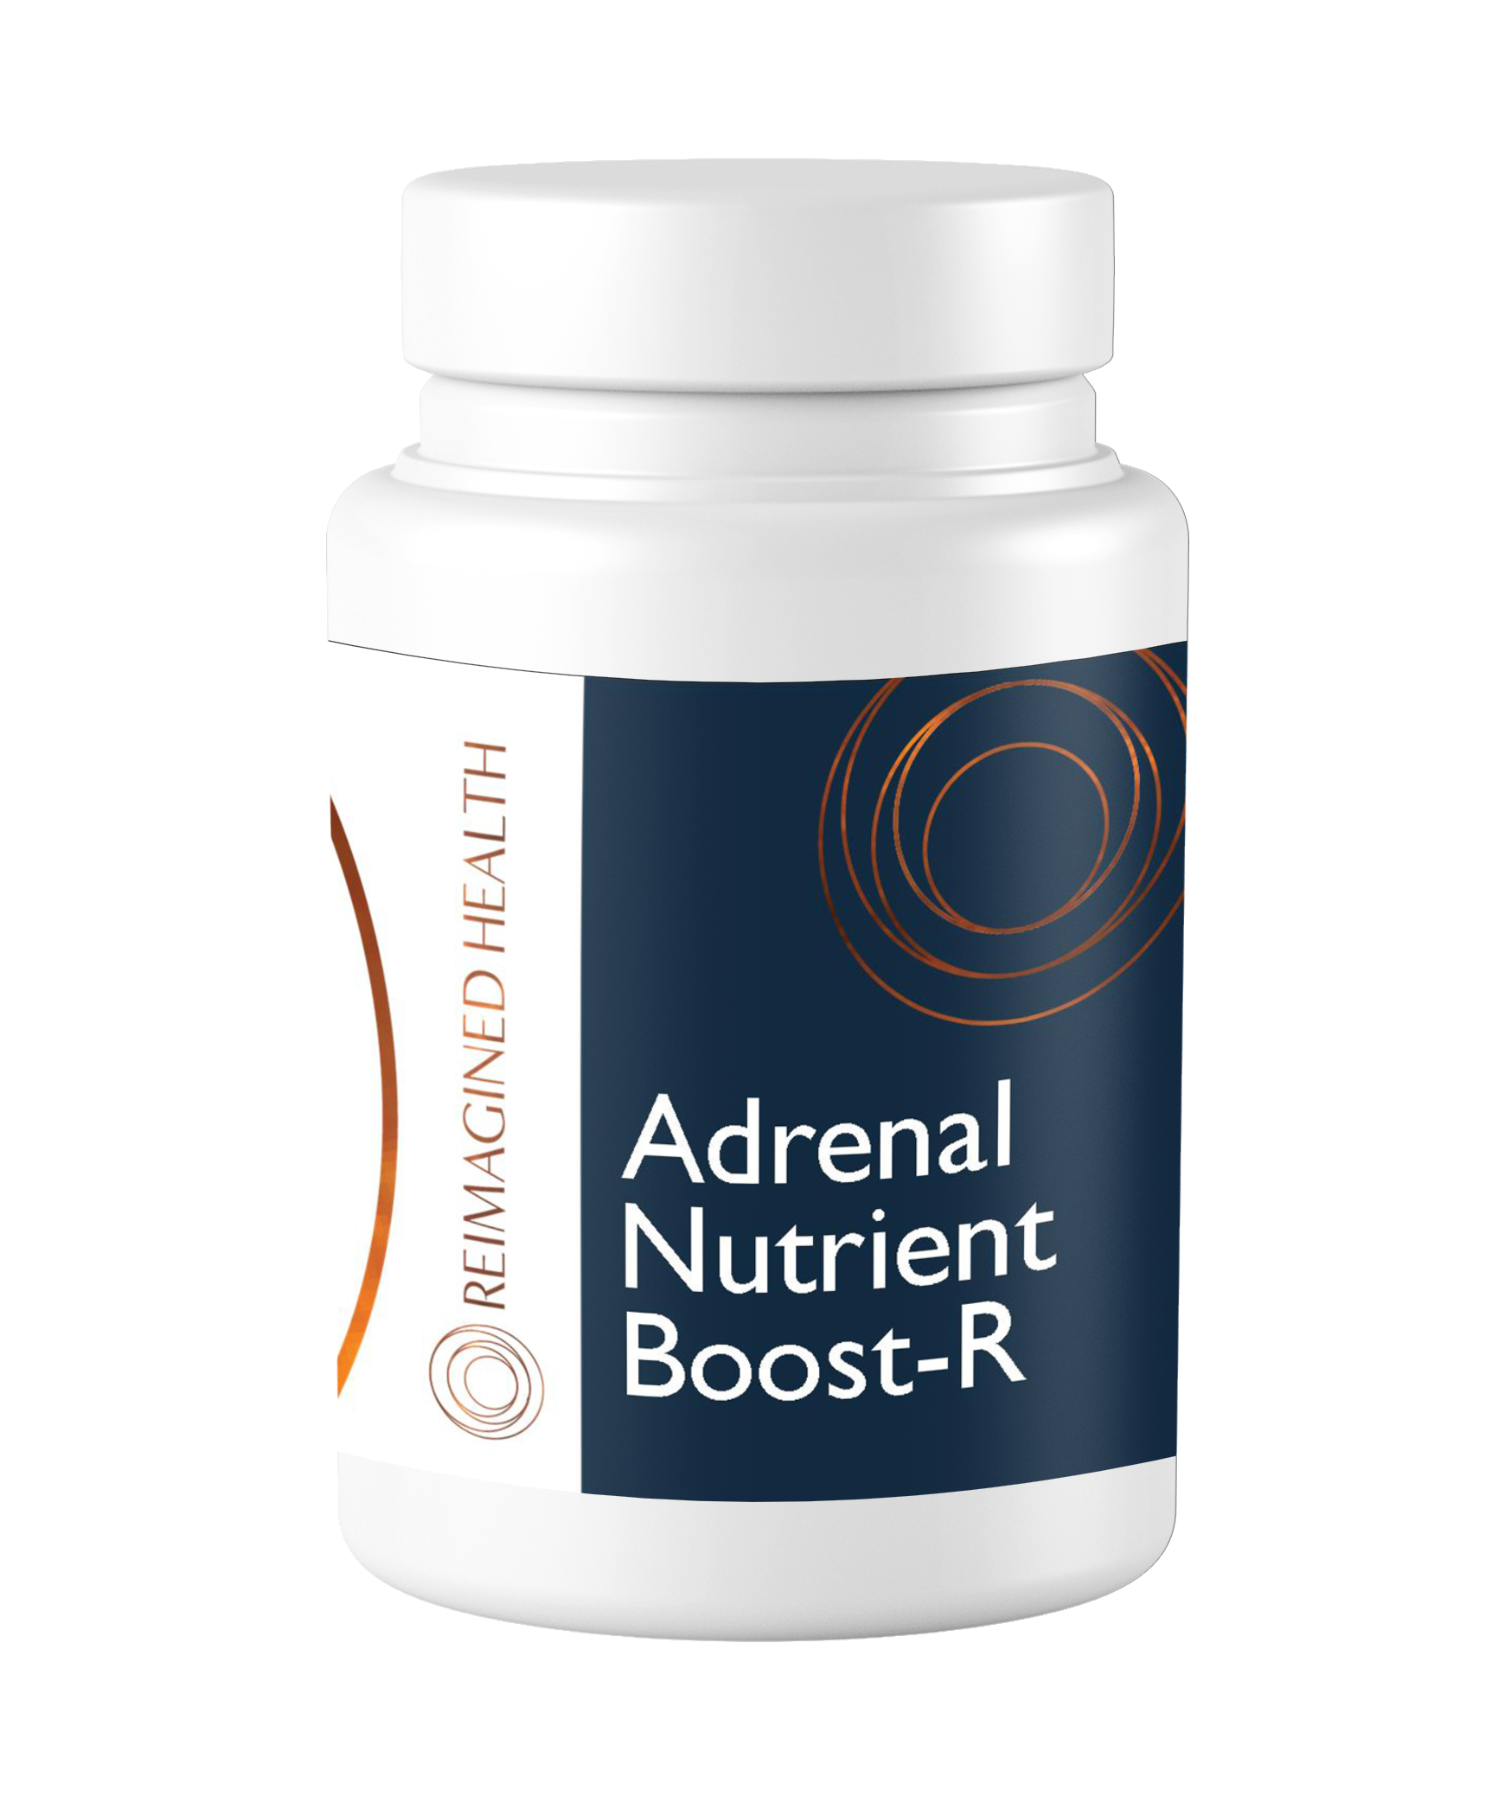 Adrenal-Nutrient-Boost-R-B259-1-1.png